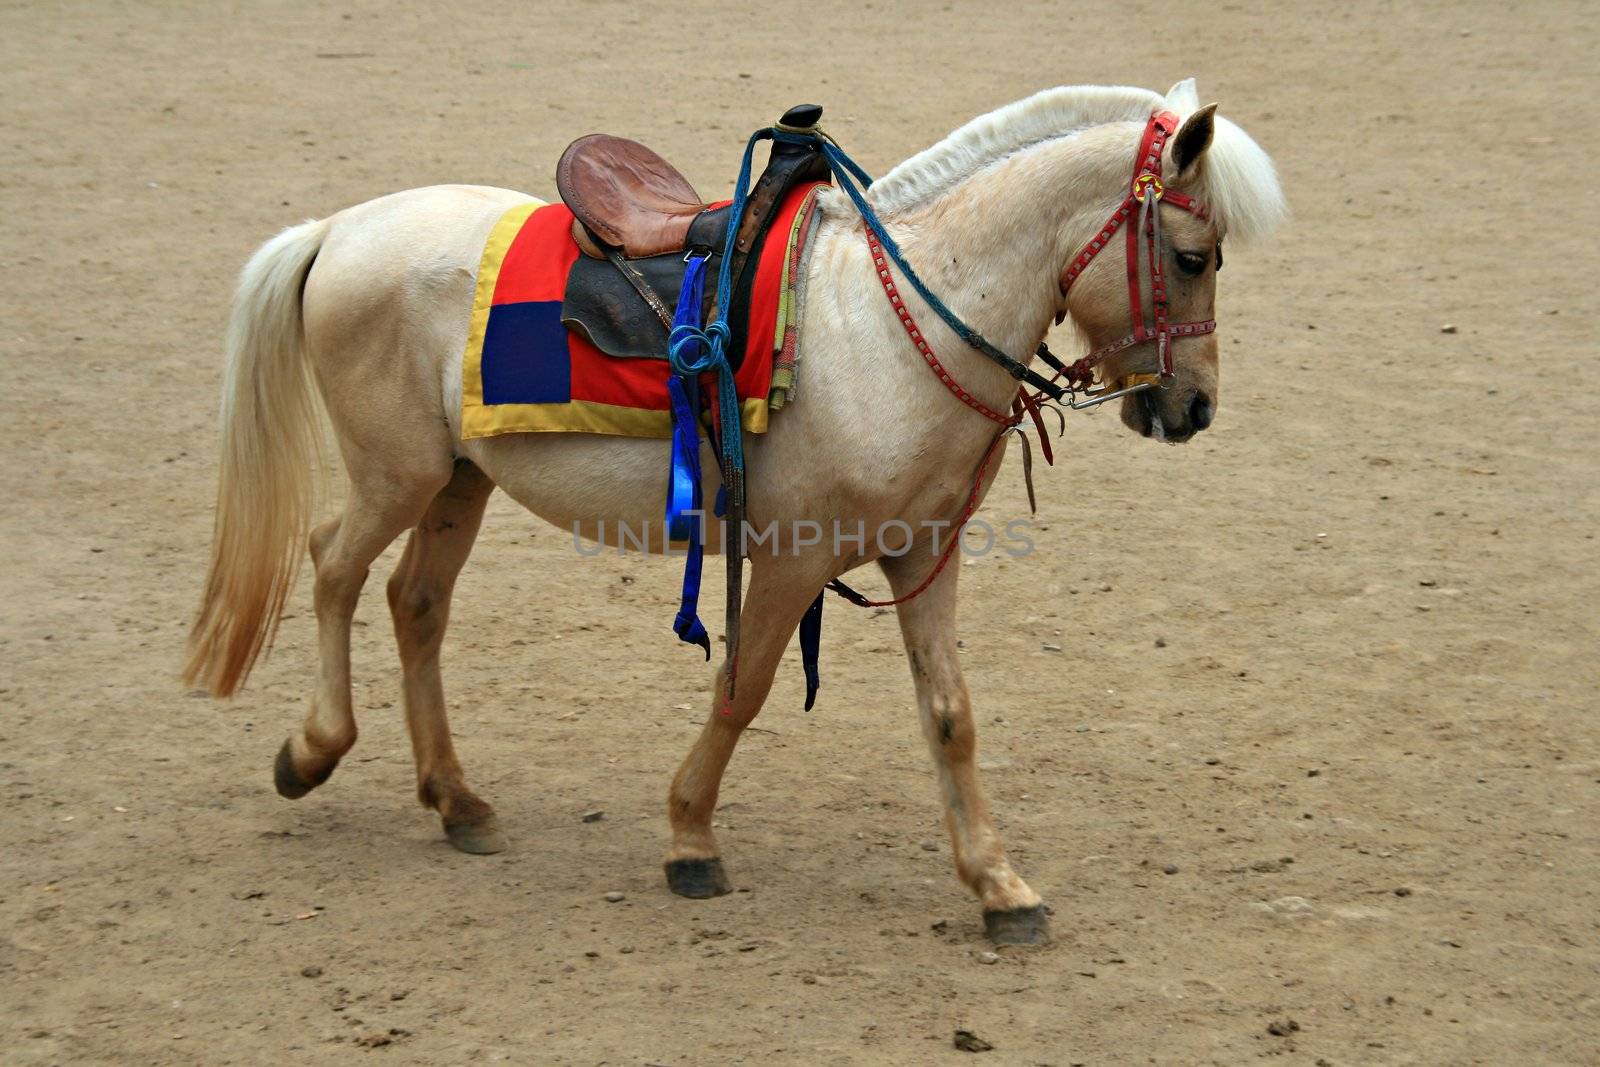 white horse with a saddle ready for a ride
